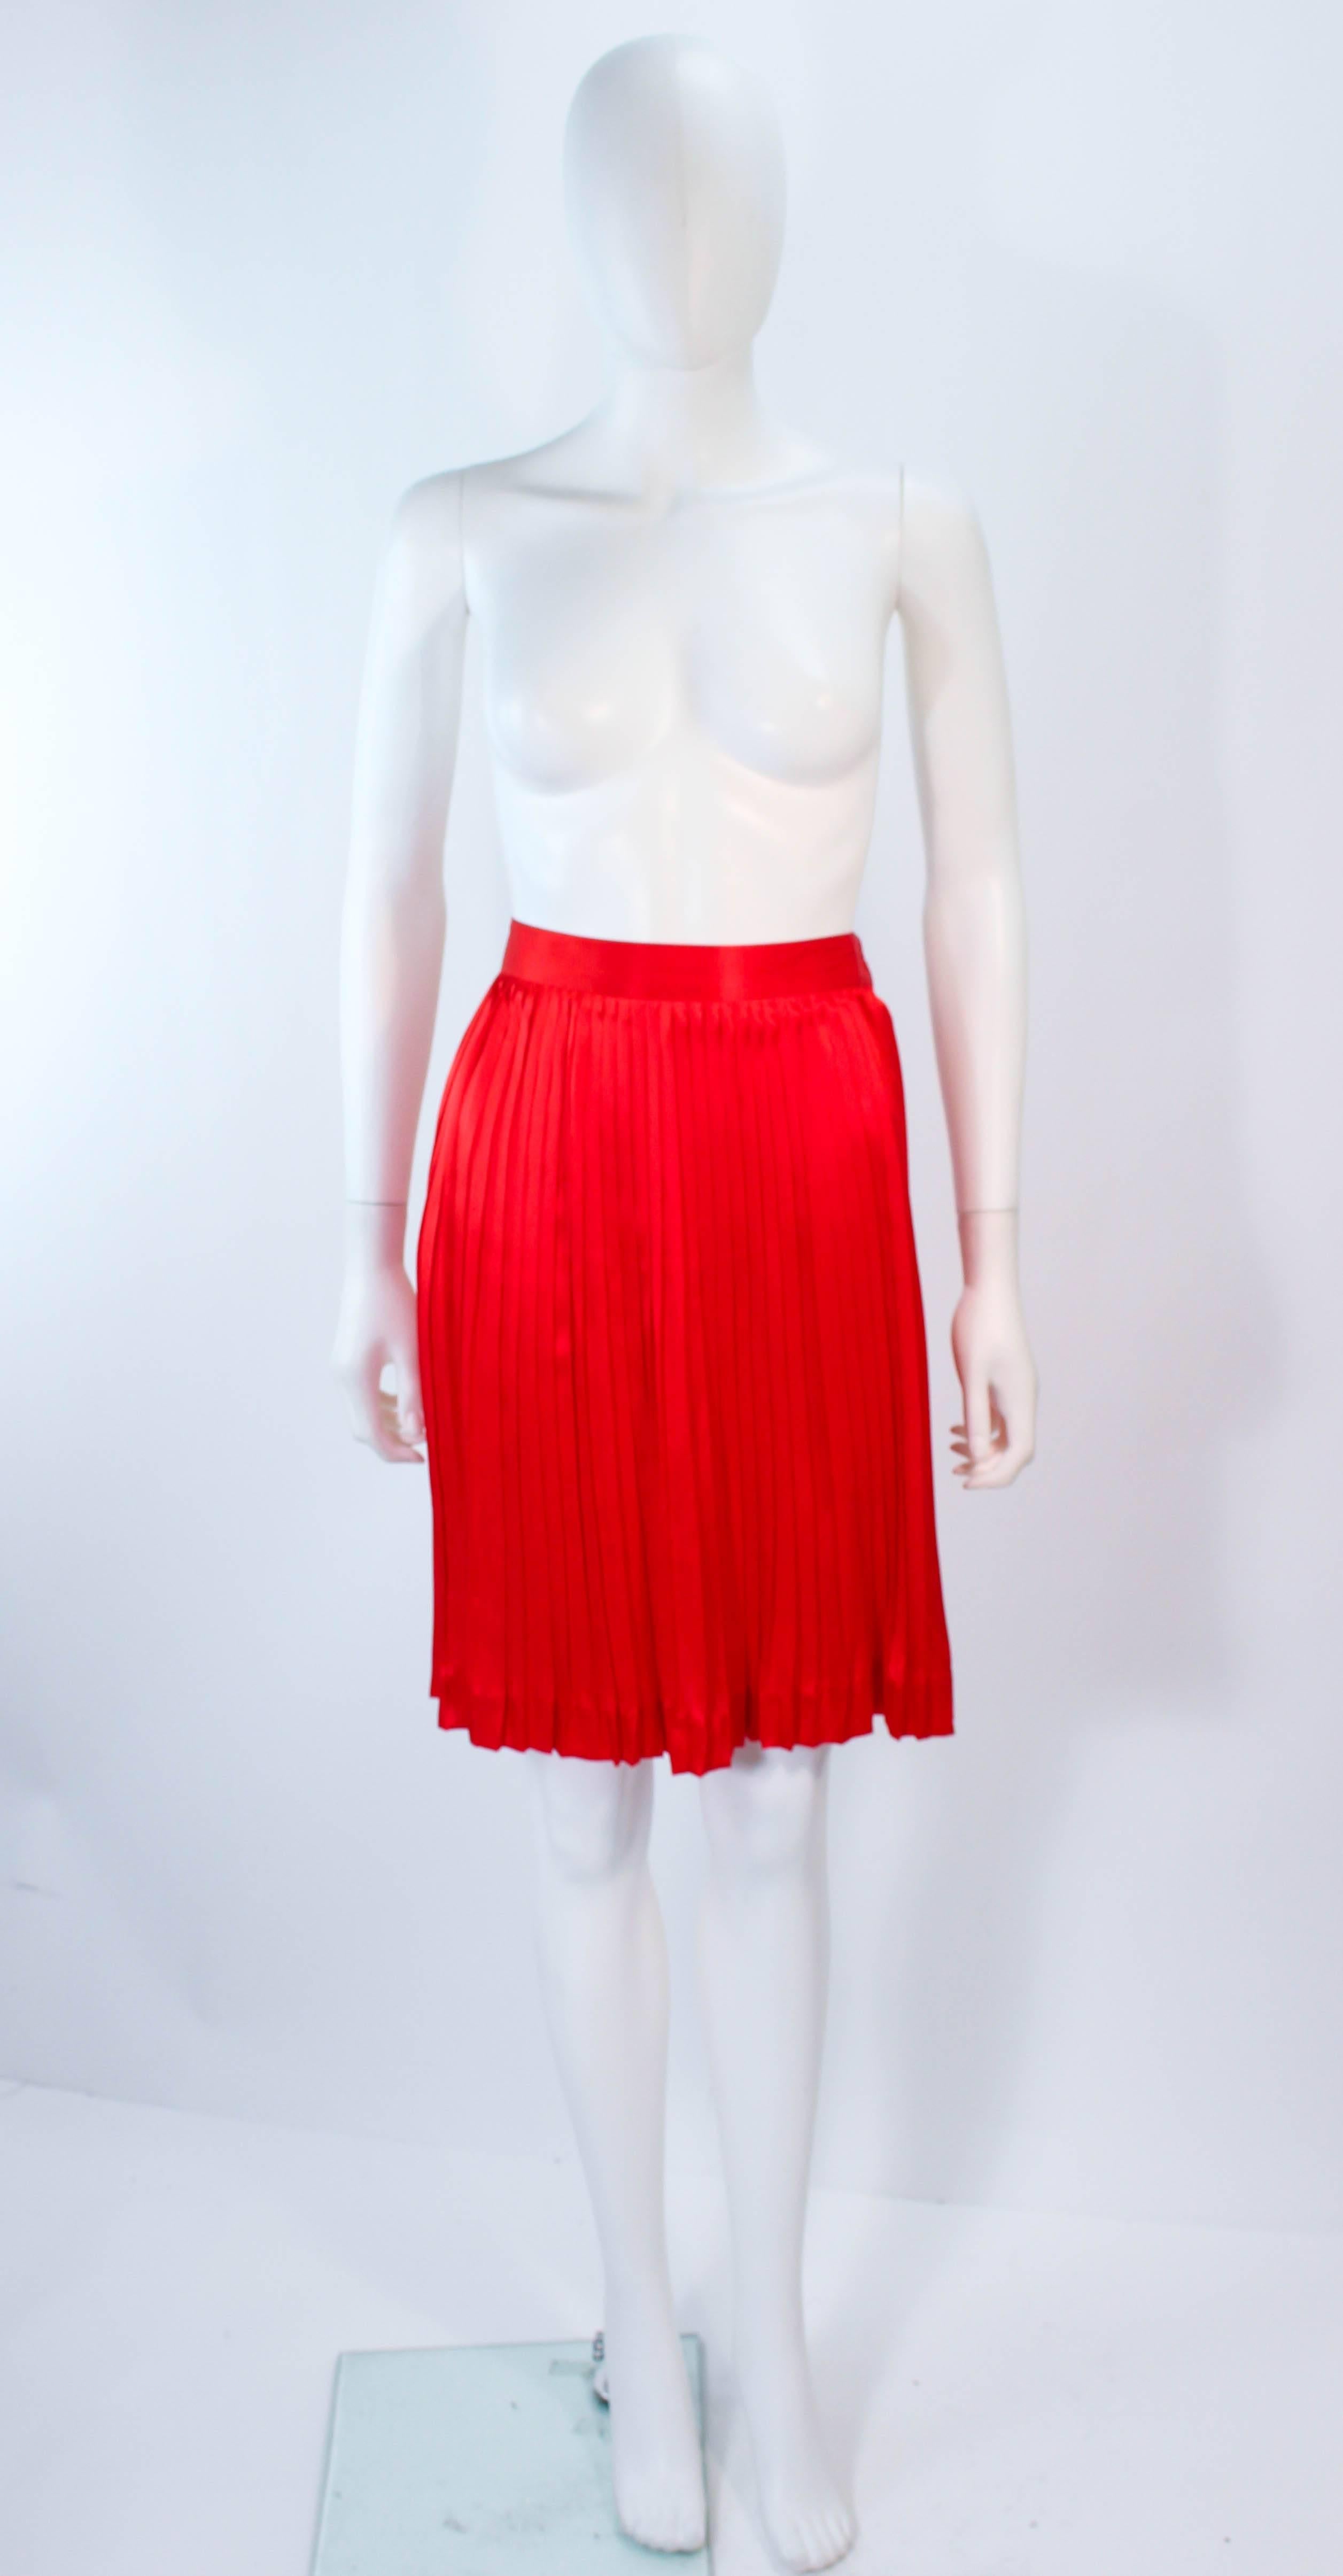 This Christian Dior skirt is composed of a red silk and features a pleated design. There is a side zipper closure. In excellent vintage condition.

**Please cross-reference measurements for personal accuracy. Size in description box is an